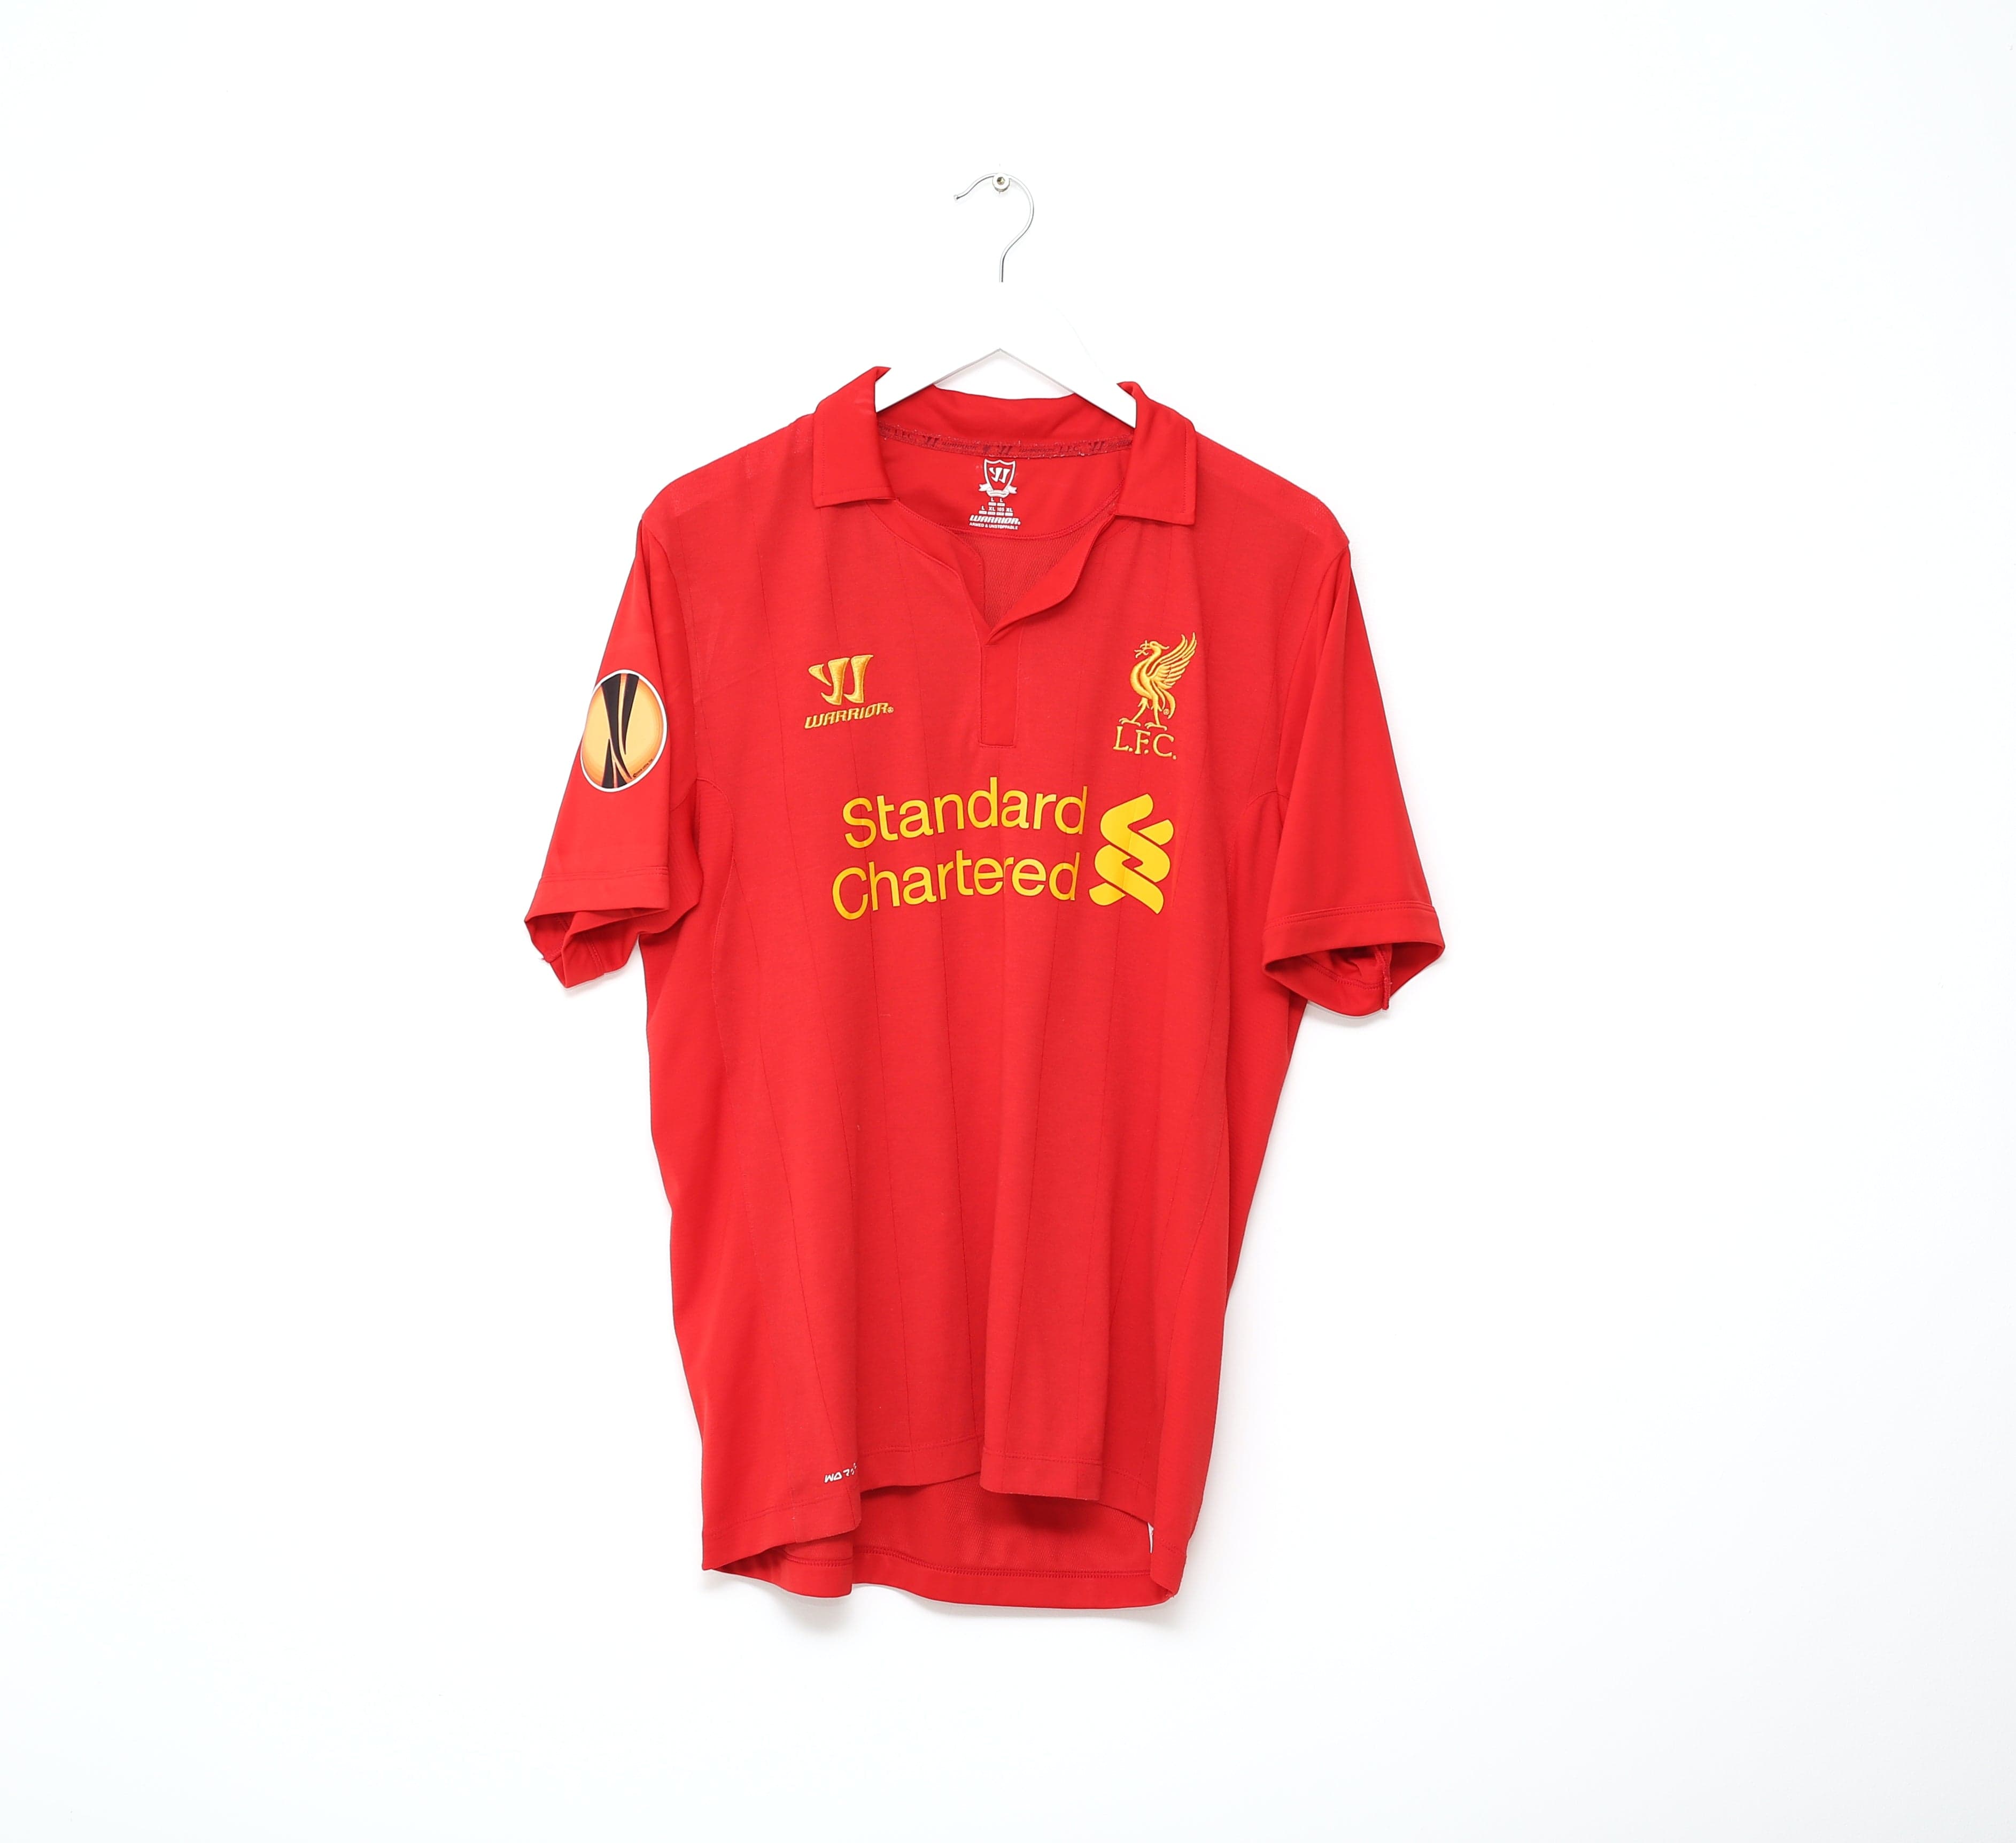 Liverpool FC 2012-13 Home Football Shirt S Size Excellent 